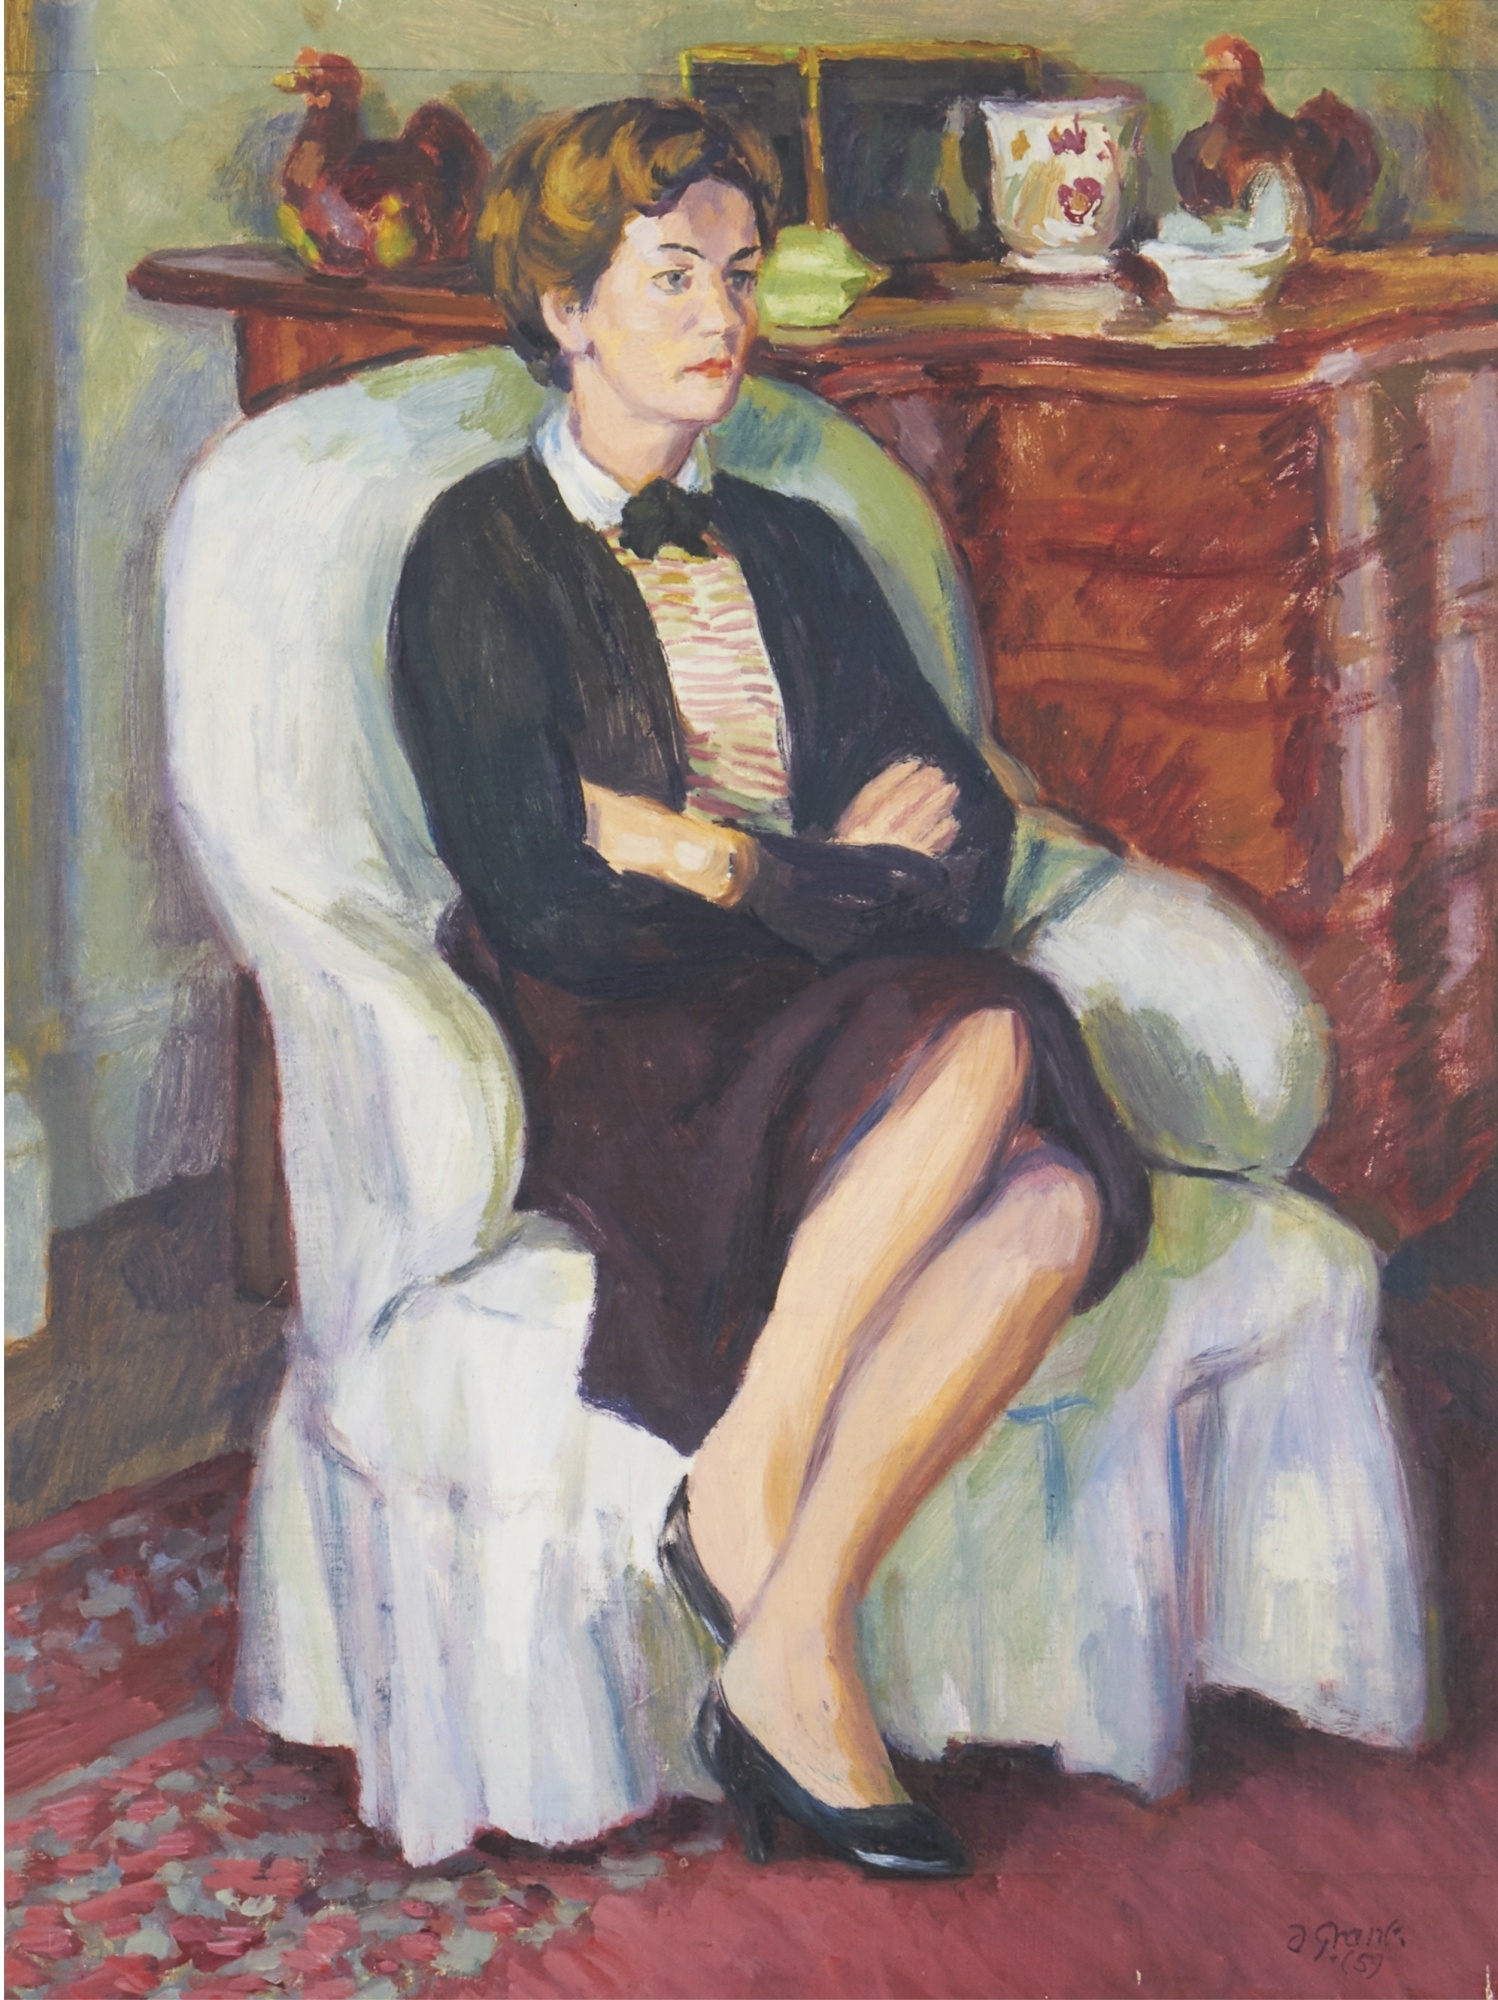 PORTRAIT OF THE DUCHESS OF DEVONSHIRE, SEATED IN AN INTERIOR by Duncan Grant, 1959